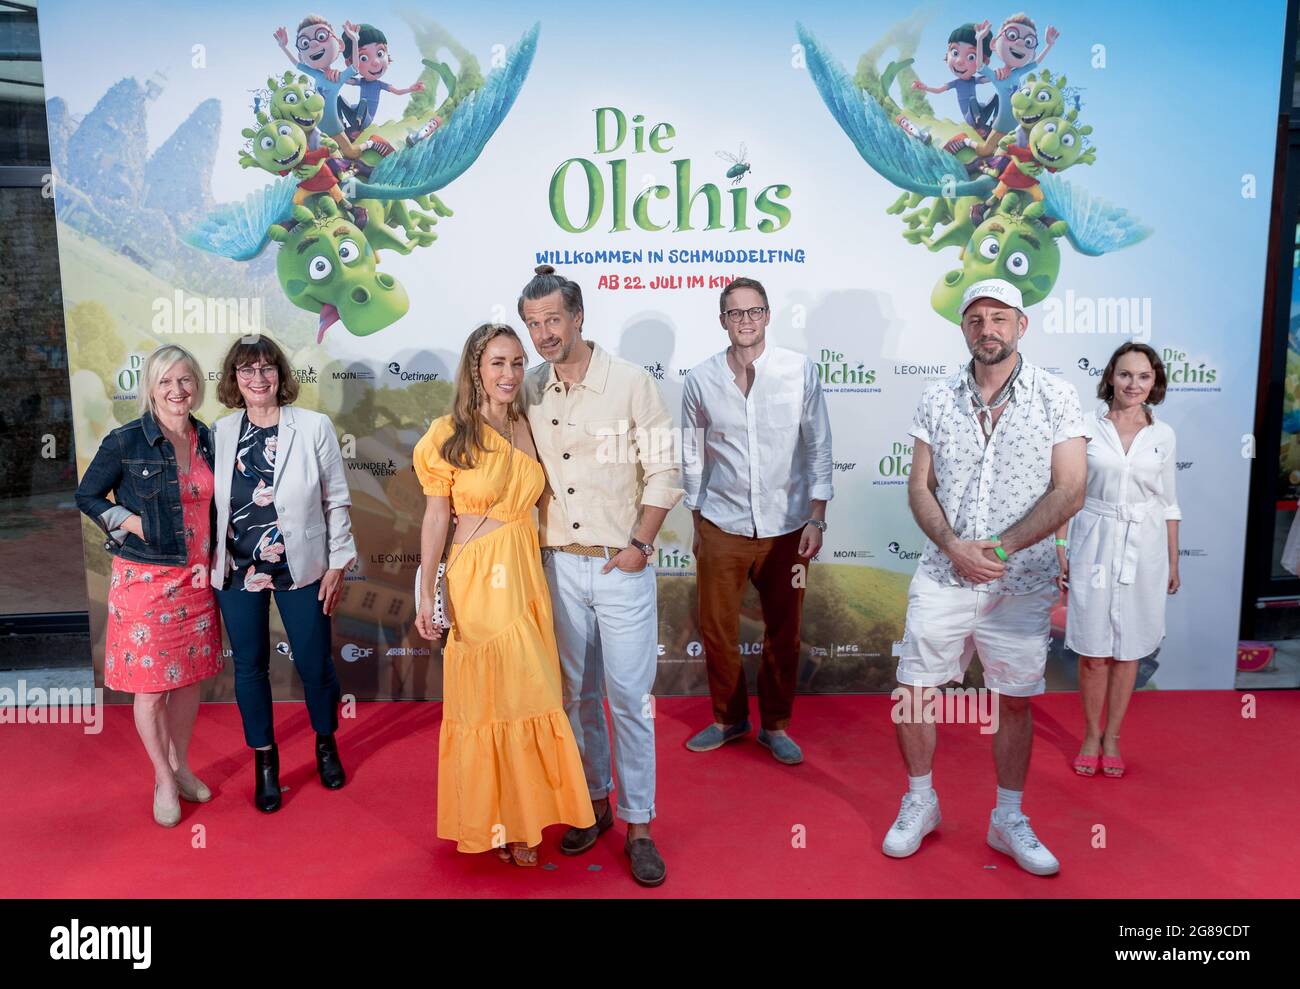 Hamburg, Germany. 18th July, 2021. Producers Gisela Schäfer (l-r) and Sunna Isenberg, voice actors Annemarie and Wayne Carpendale, Jan Asmus, Filmförderung Hamburg, rapper and theme song composer Das Bo and Jana Vavra, Universum Film, stand on the red carpet at the German premiere of the film 'Die Olchis - Willkommen in Schmuddelfing'. Credit: Markus Scholz/dpa/Alamy Live News Stock Photo